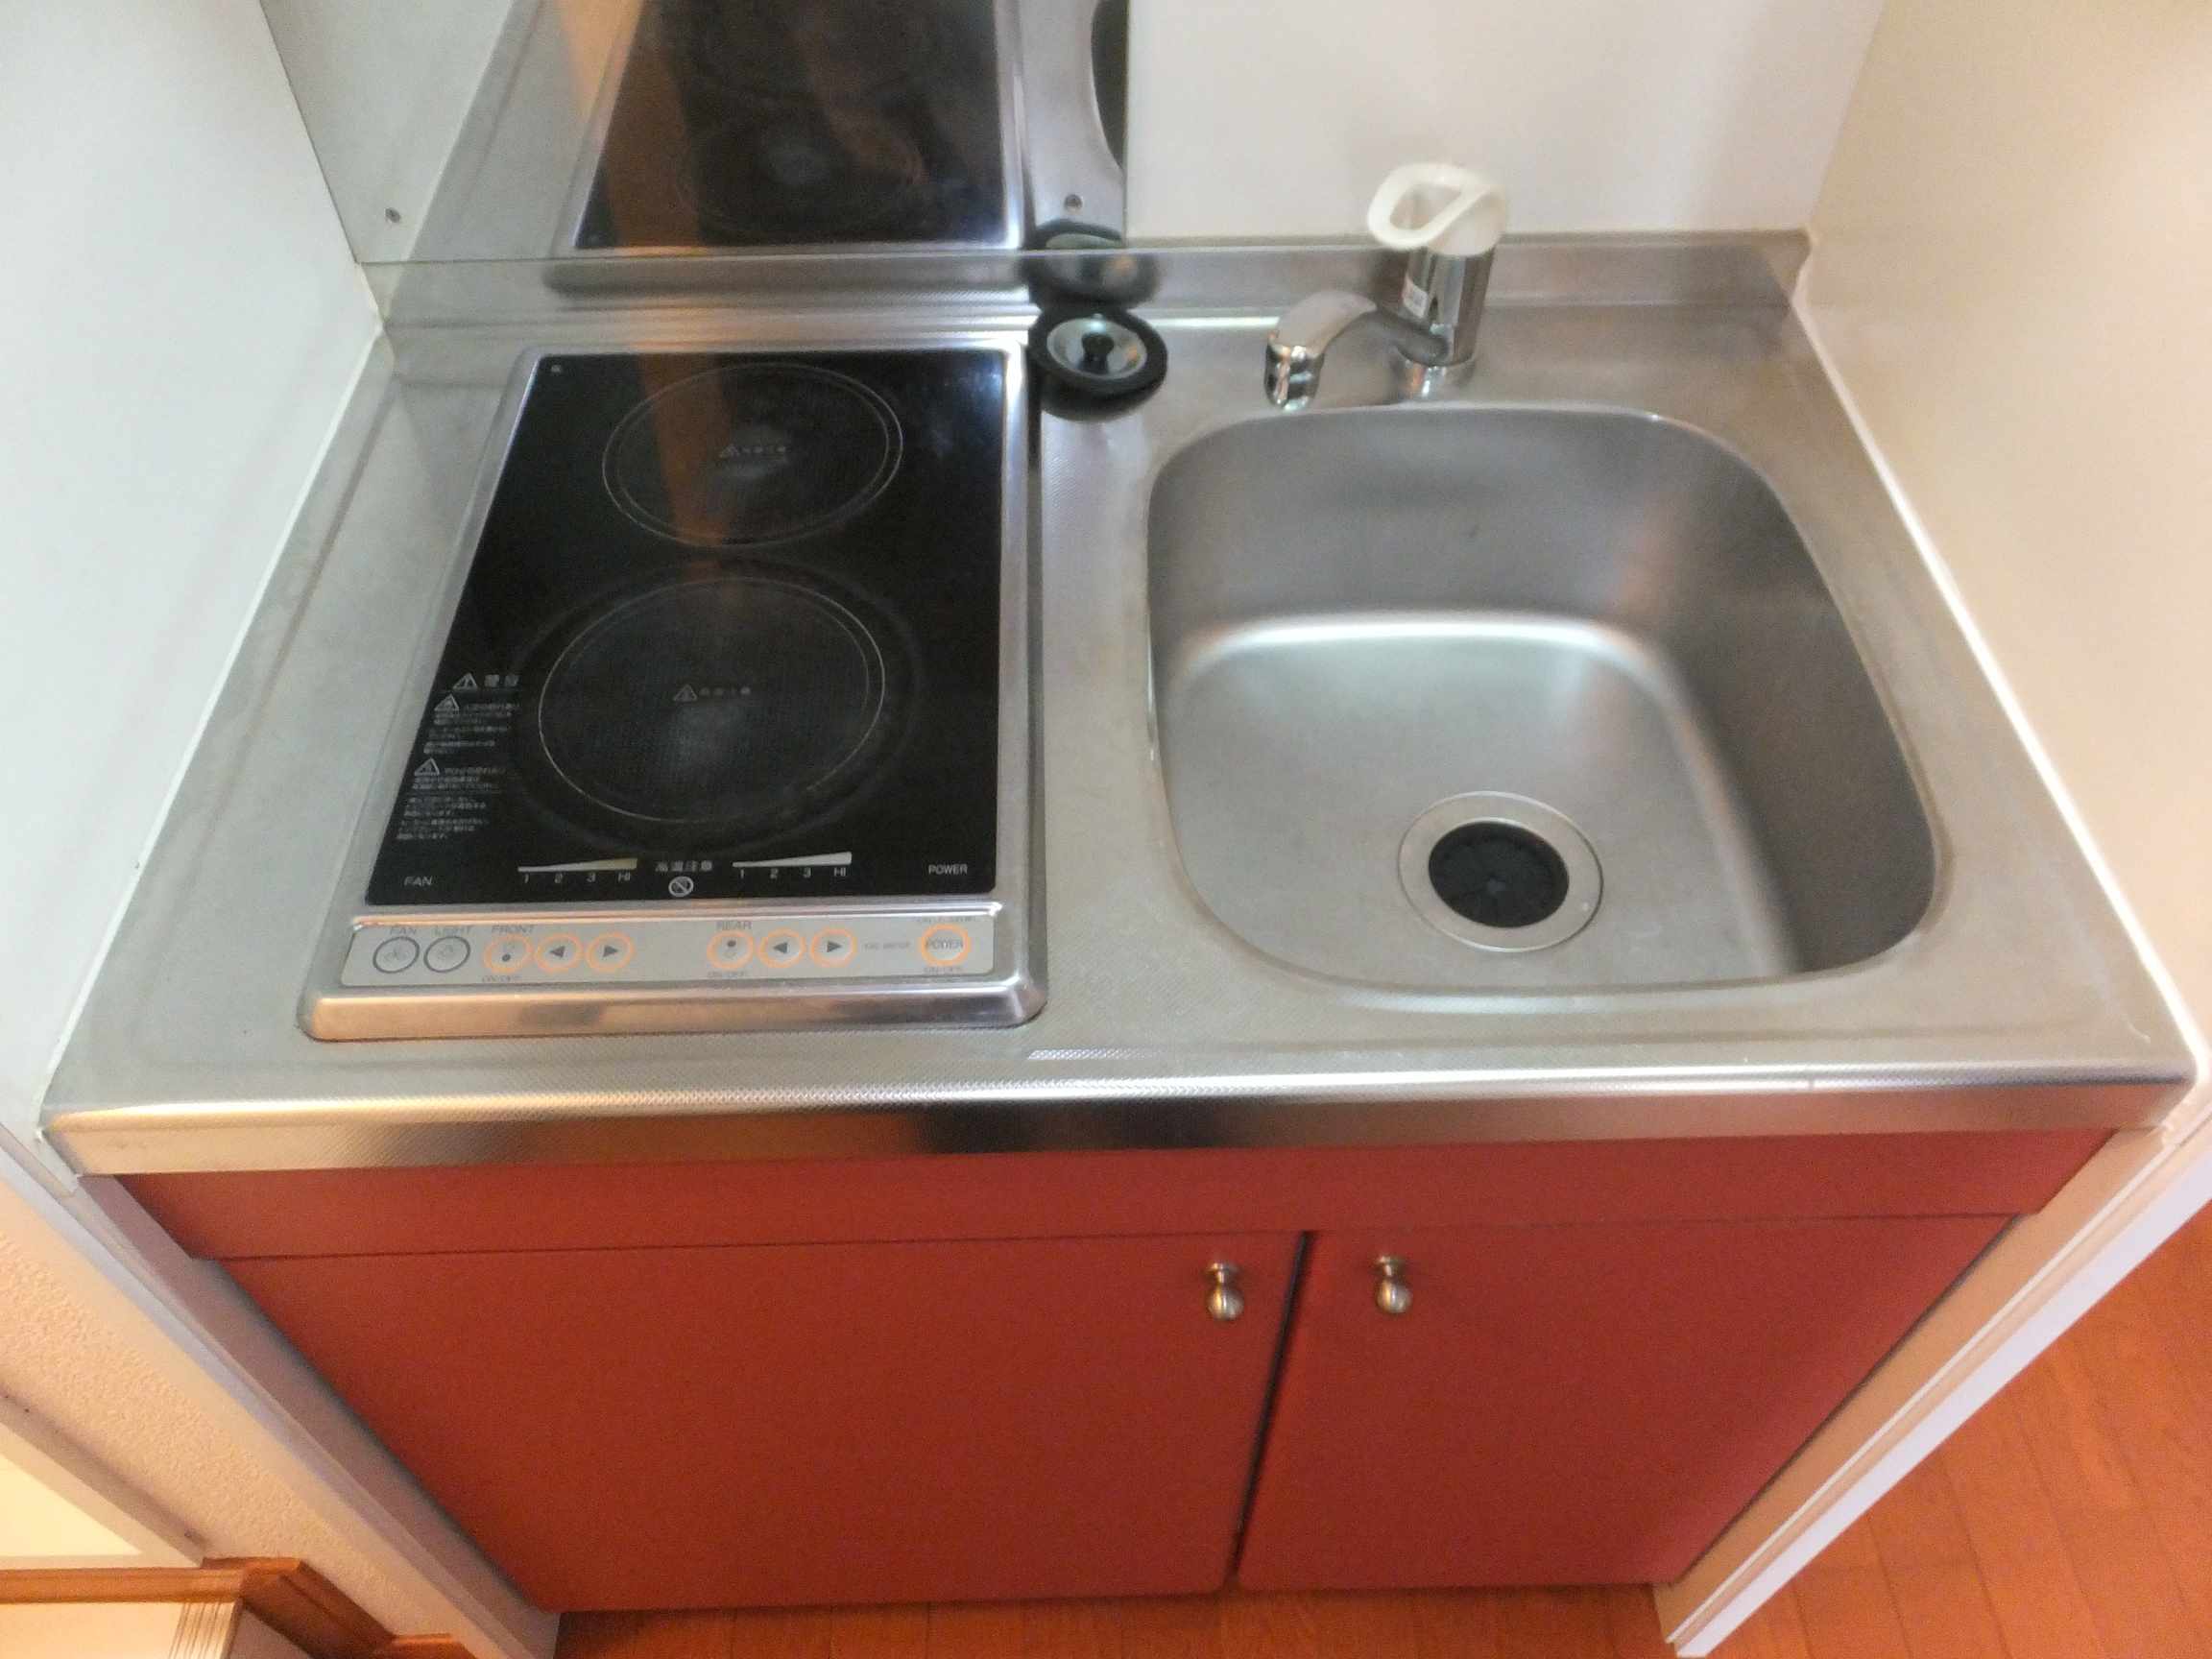 Kitchen. Two-necked electric stove